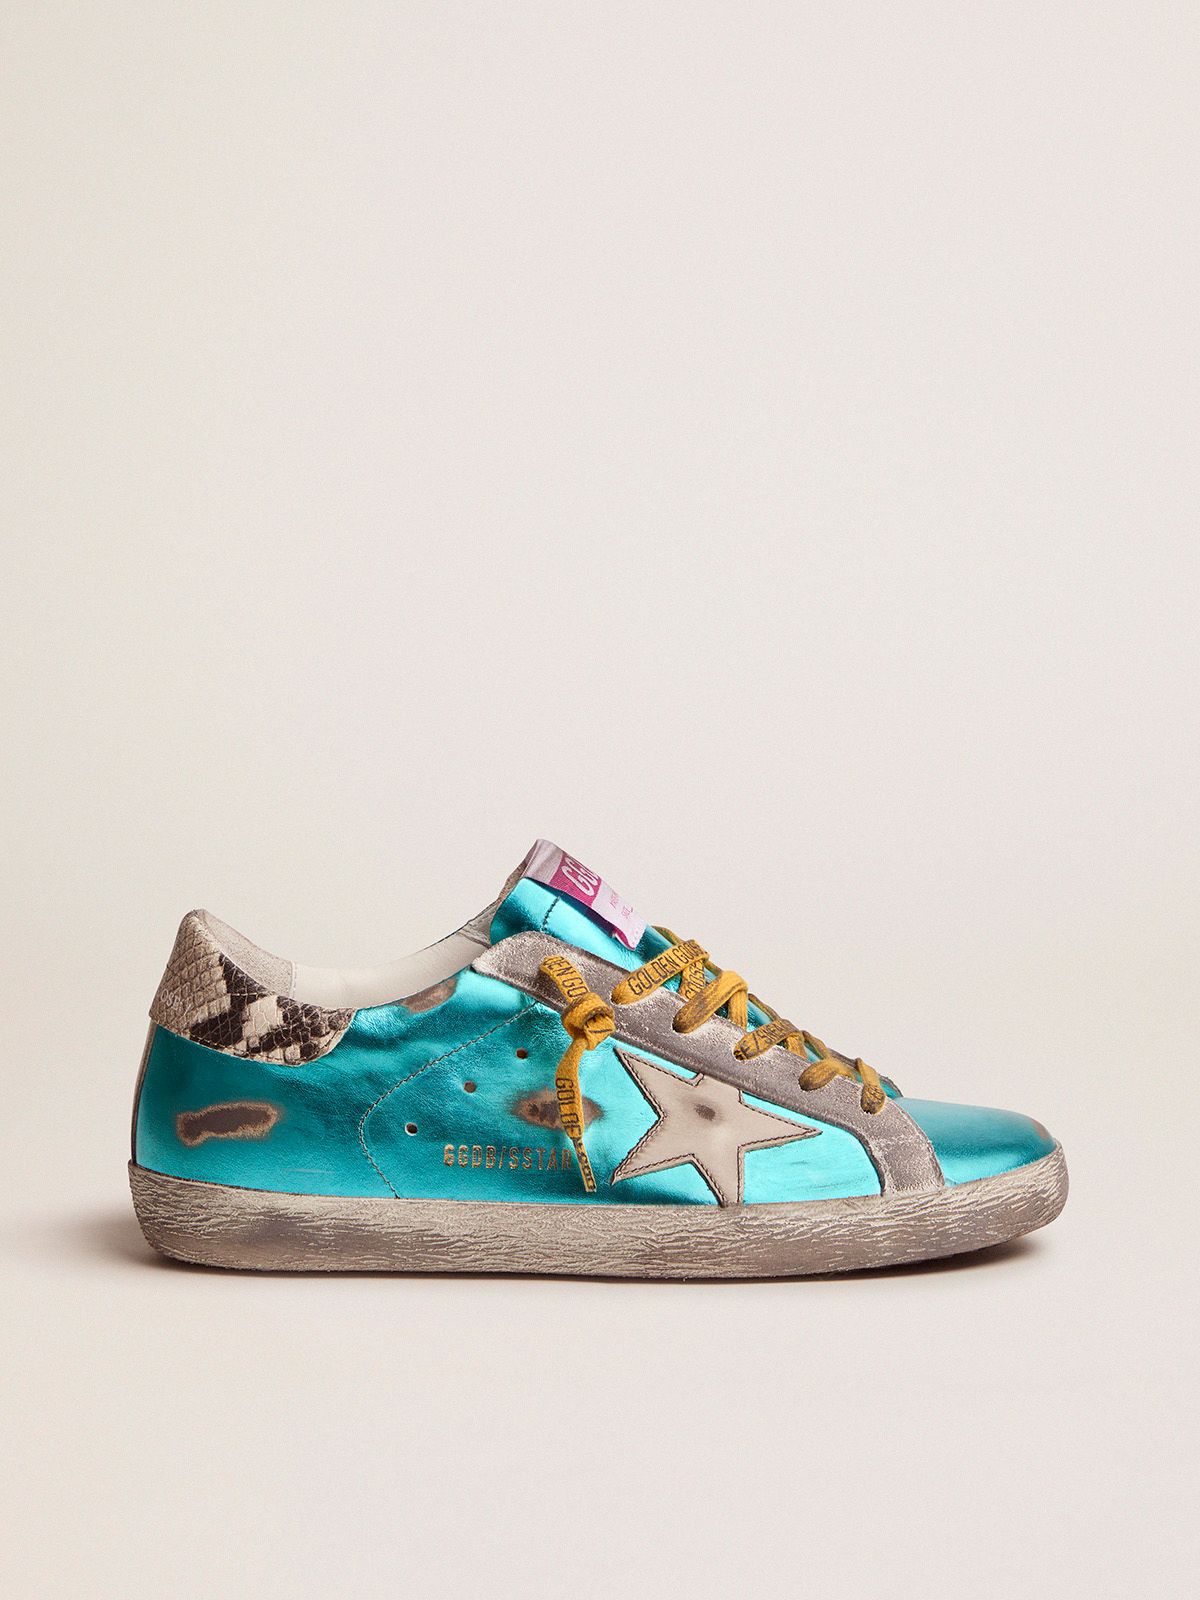 golden goose Turquoise laminated LTD snake-print sneakers with green heel Super-Star tab